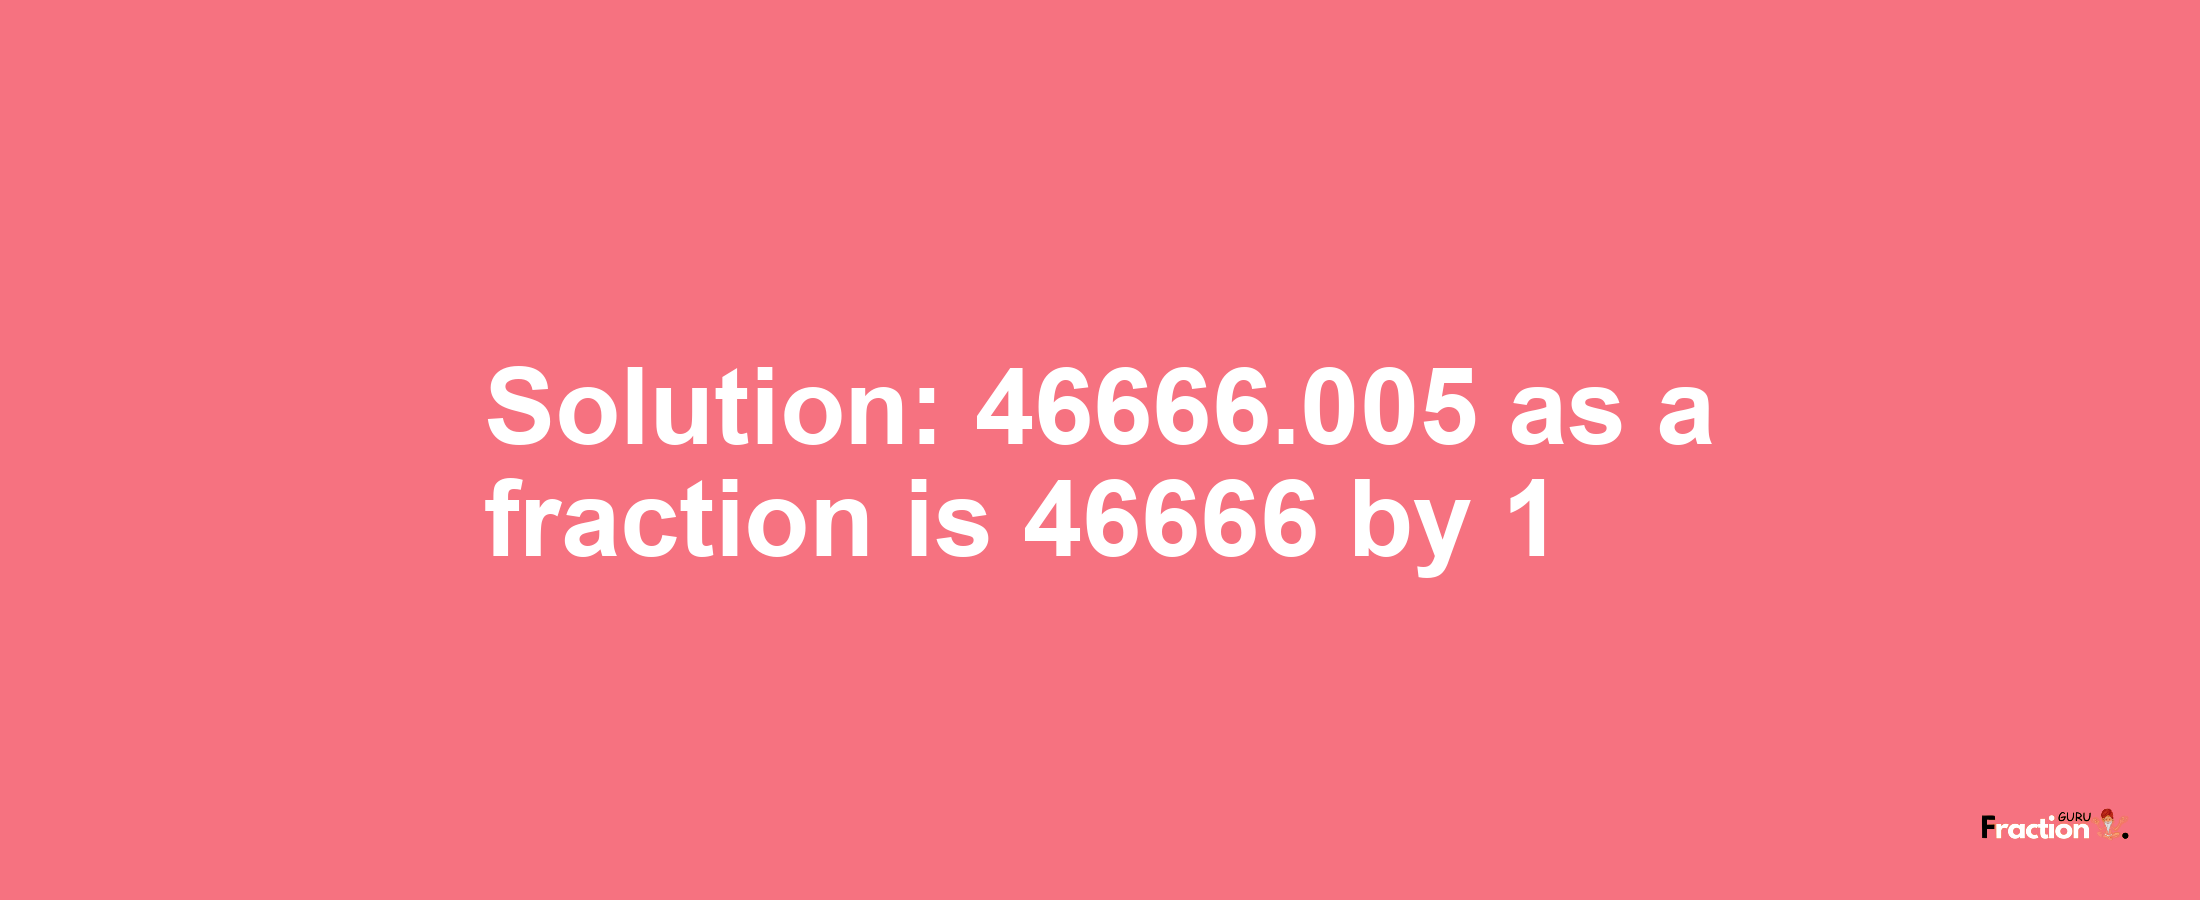 Solution:46666.005 as a fraction is 46666/1